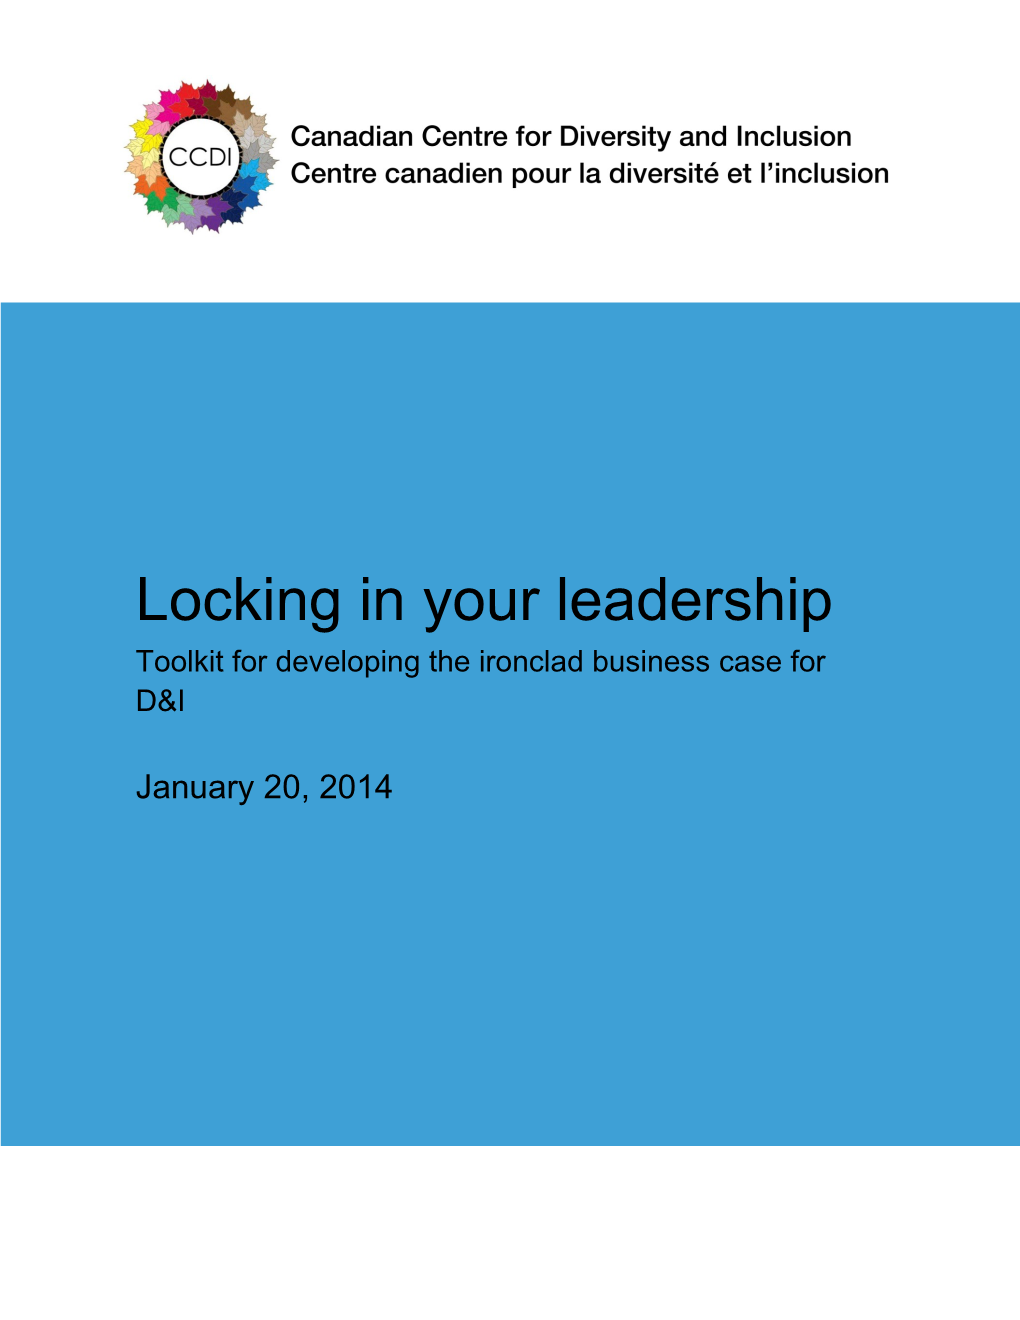 Locking in Your Leadership Toolkit for Developing the Ironclad Business Case for D&I